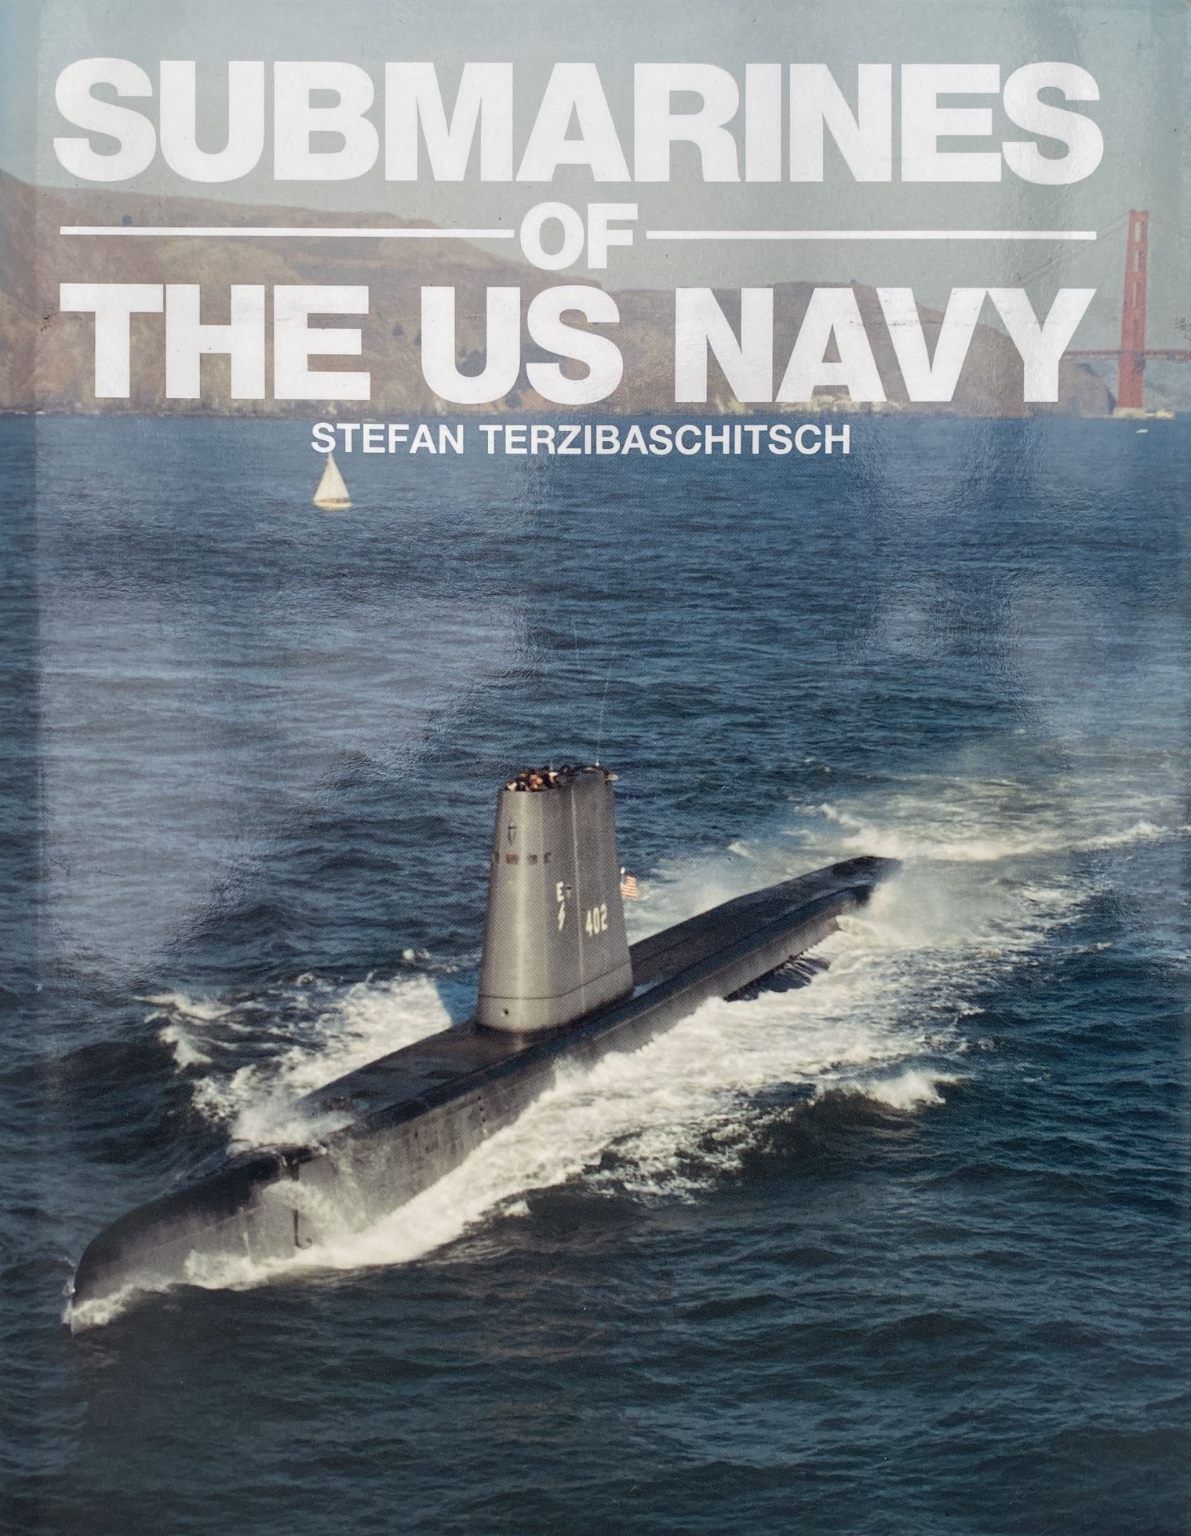 SUBMARINES of the US NAVY